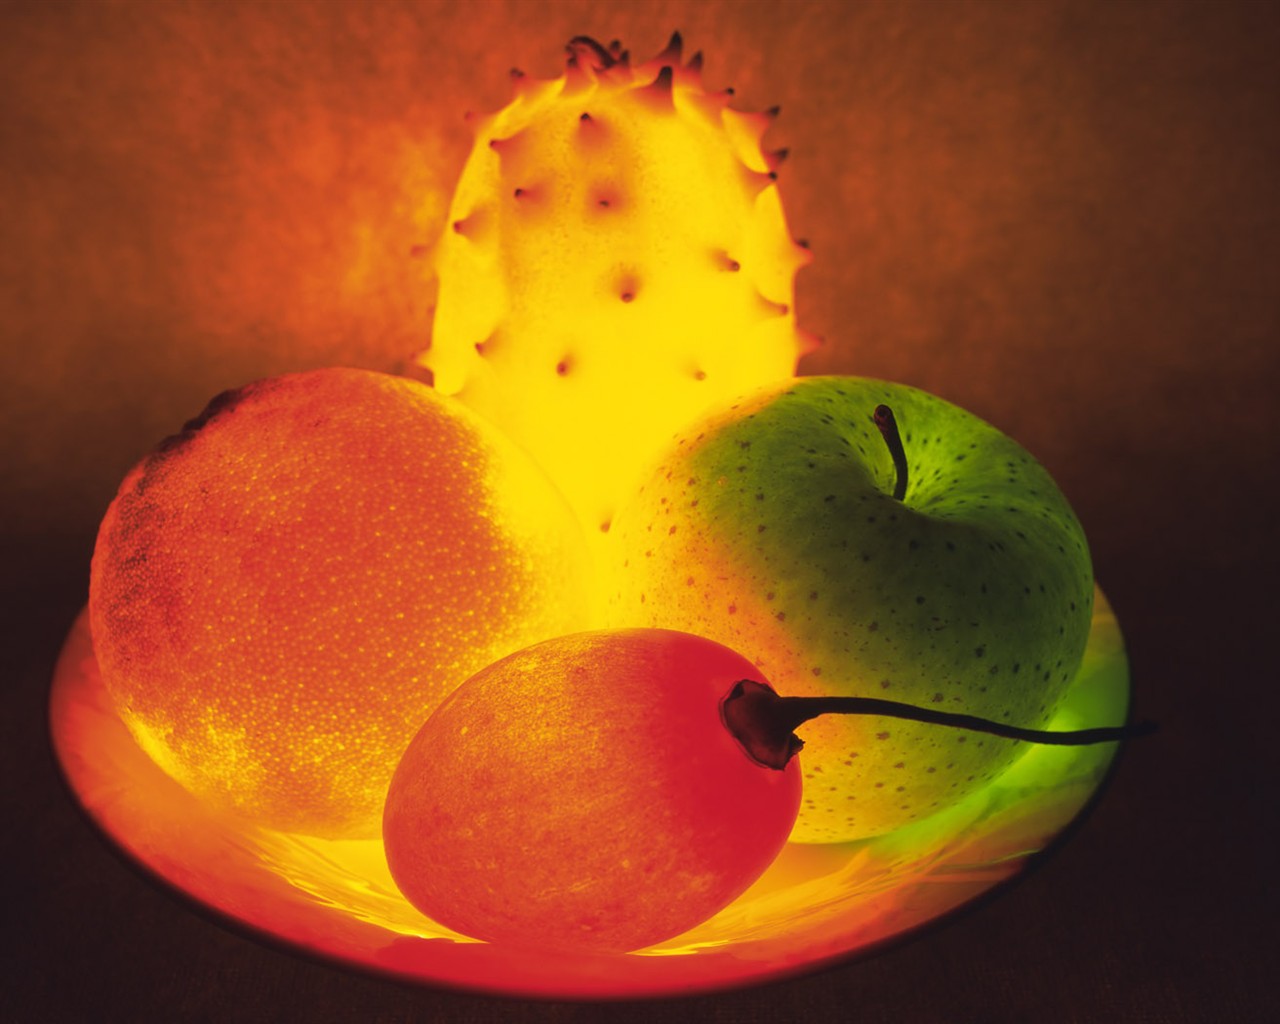 Light Obst Feature (1) #4 - 1280x1024